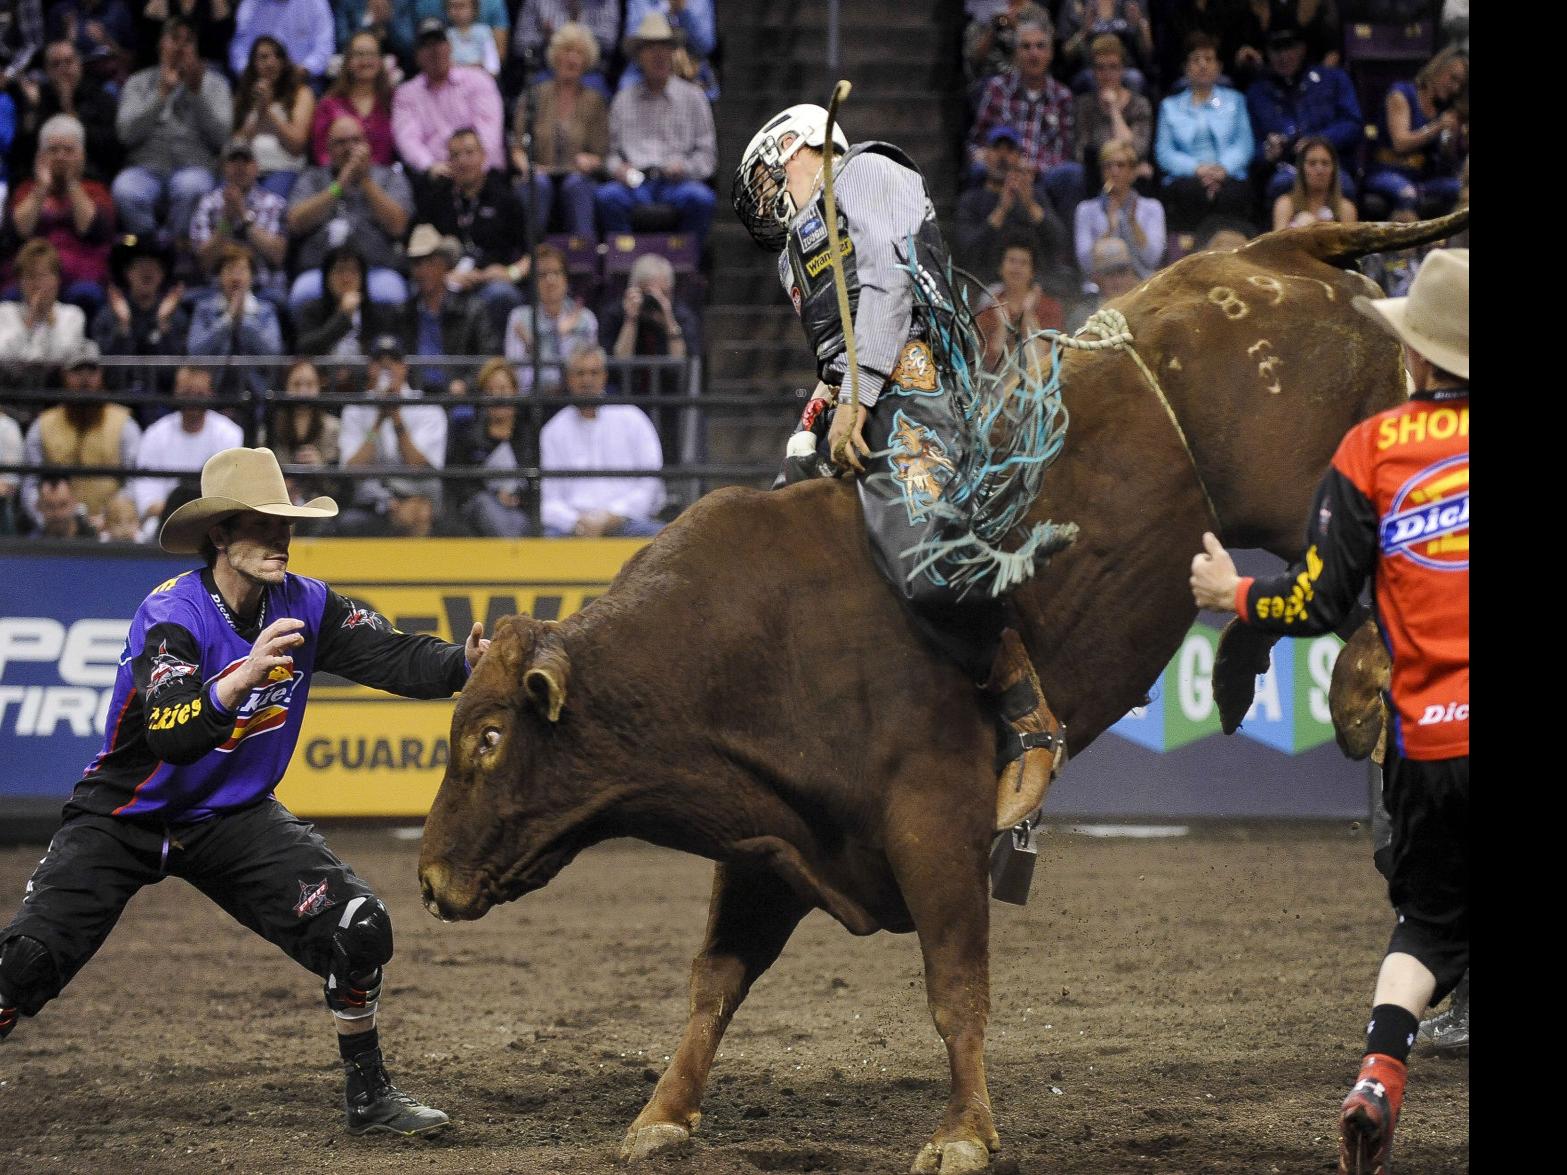 Bullfighters takes a few hits from PBR Bucking Bull - Professional